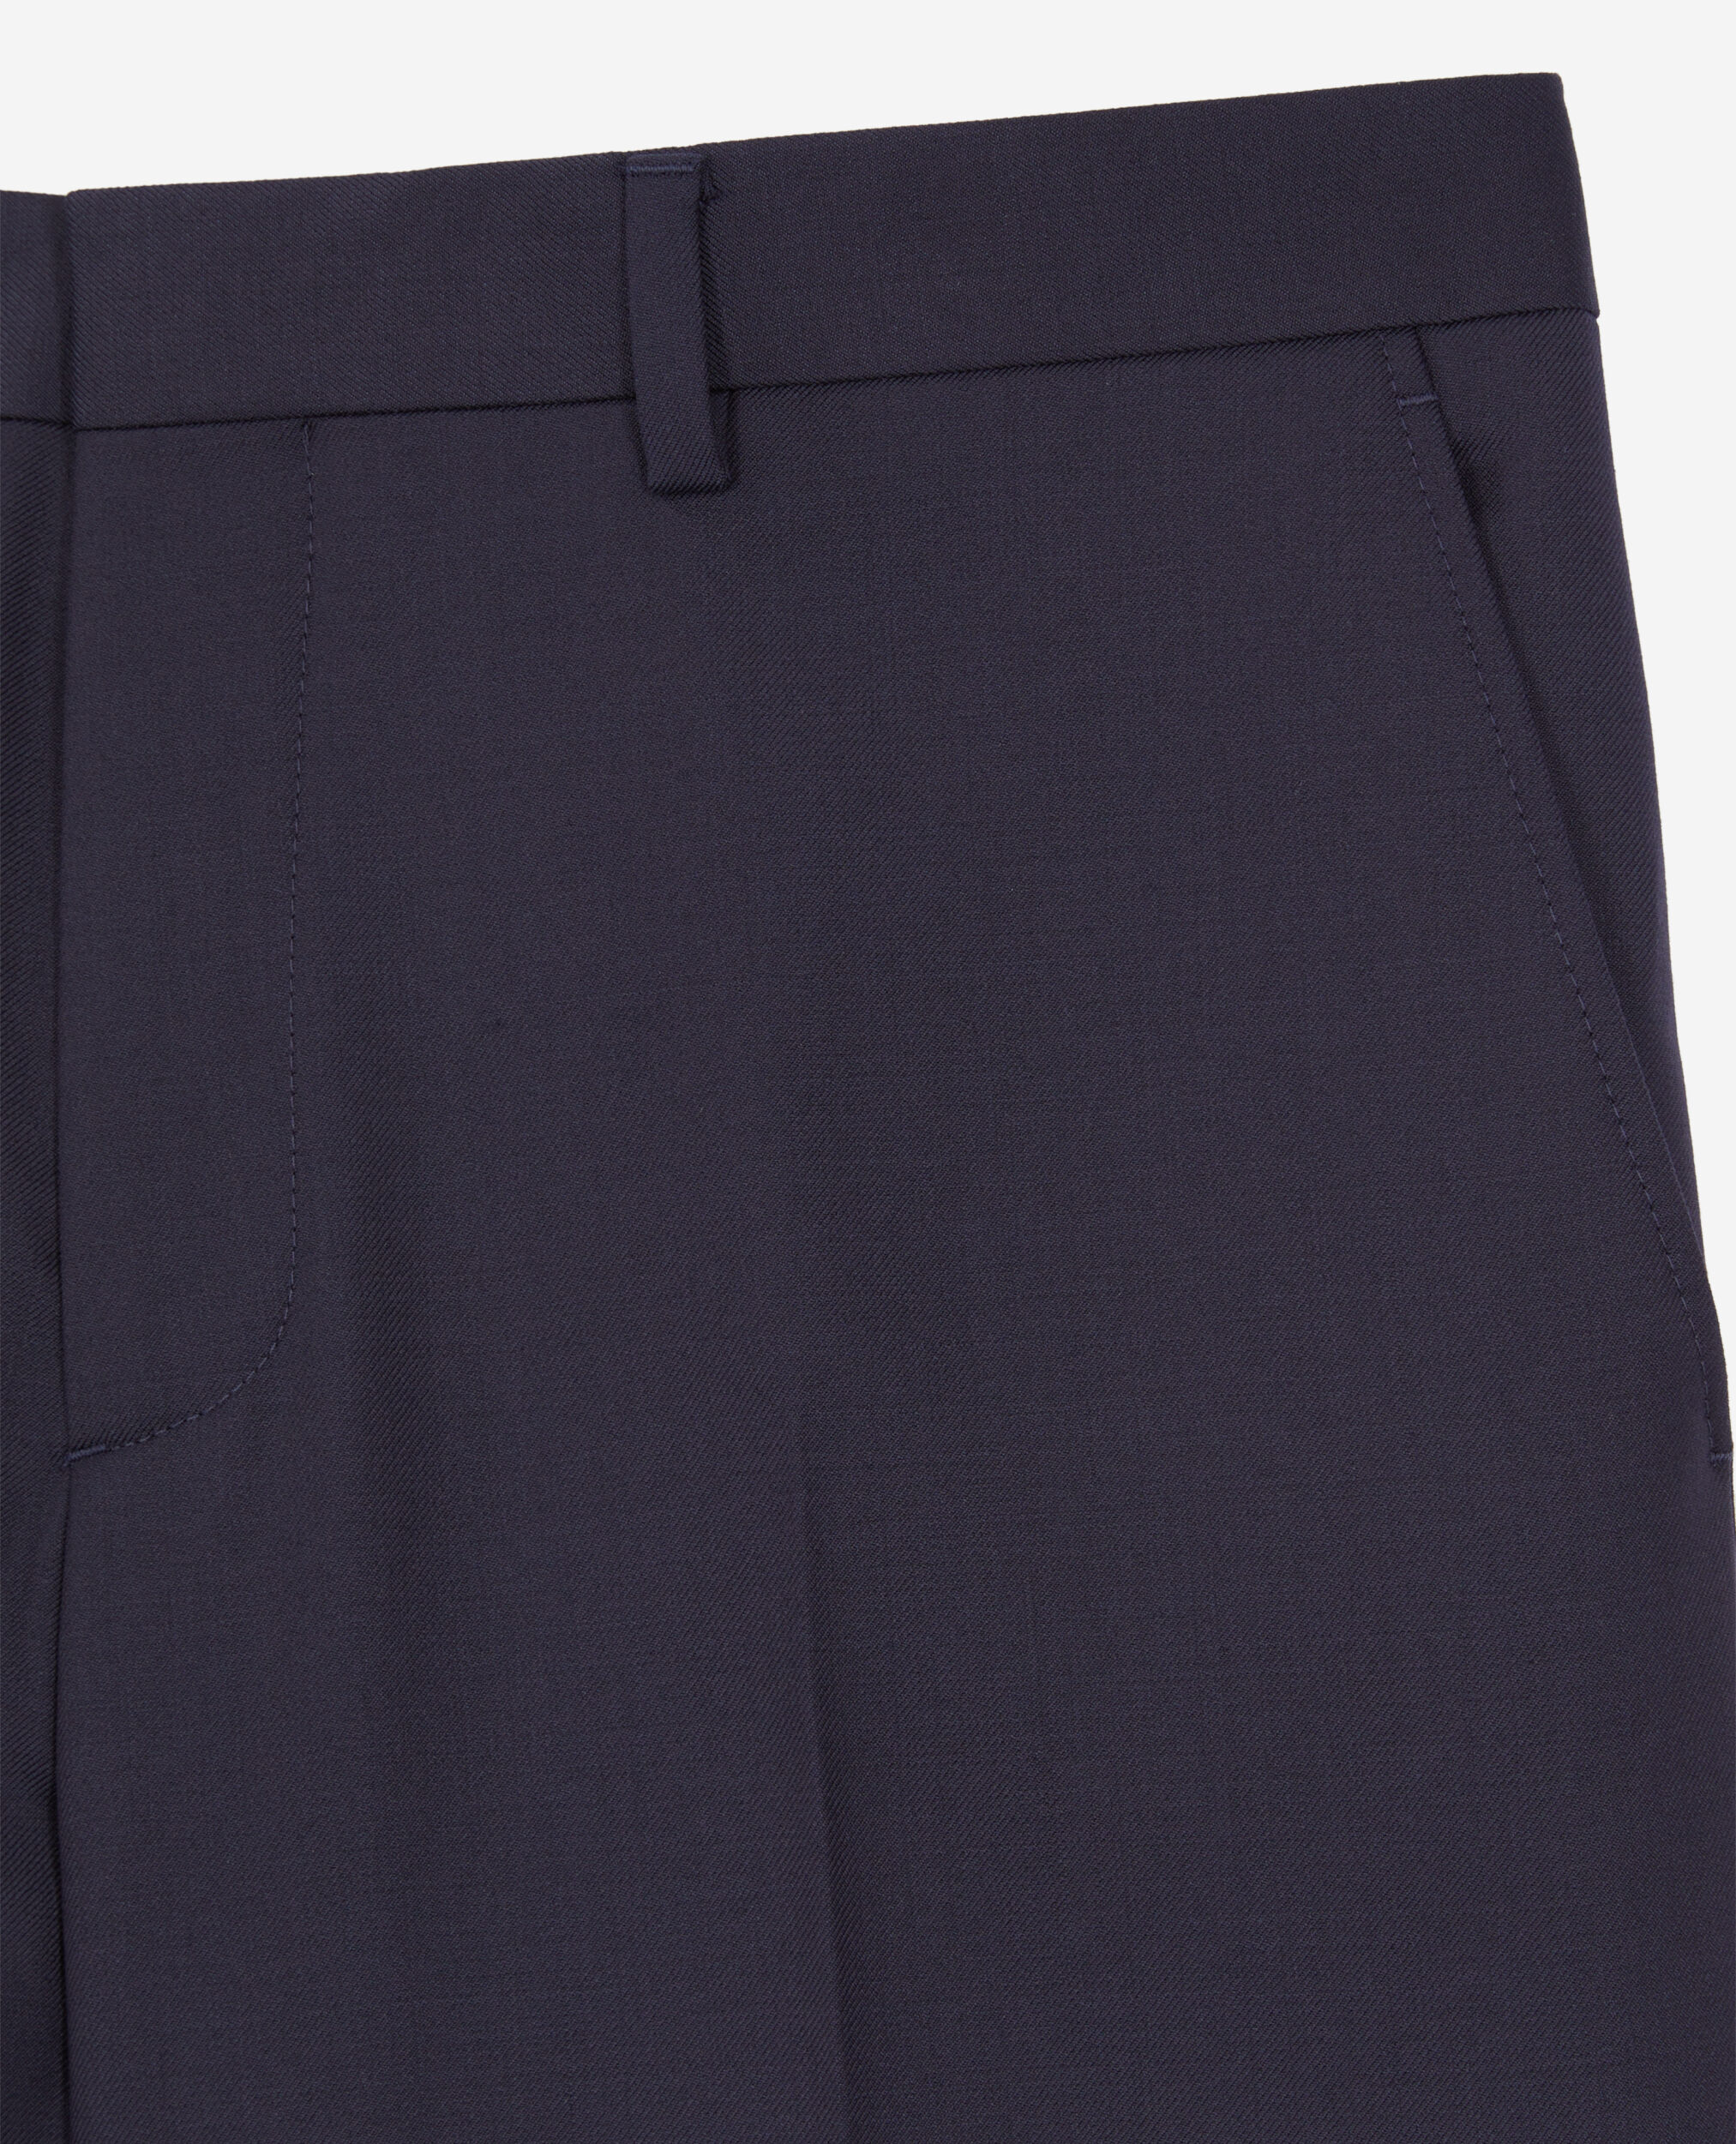 Navy blue wool suit trousers, NAVY, hi-res image number null